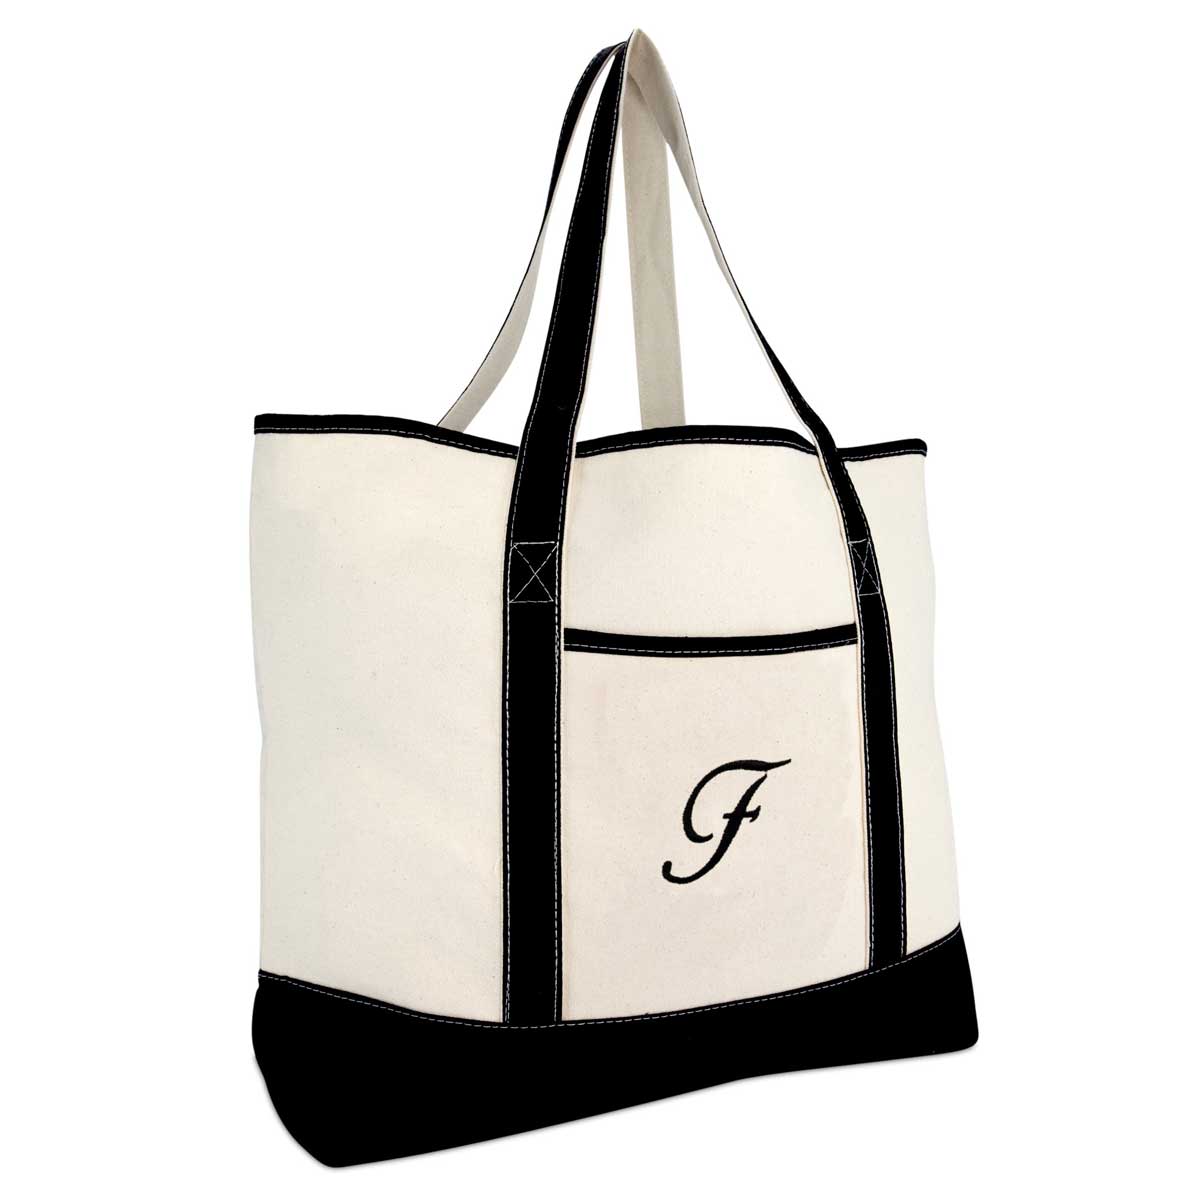 CURSIVE NAME PERSONALIZED TOTE PURSE SPORTS GYM TRAVEL OVERNIGHT BEACH BAG  ZIPS | eBay